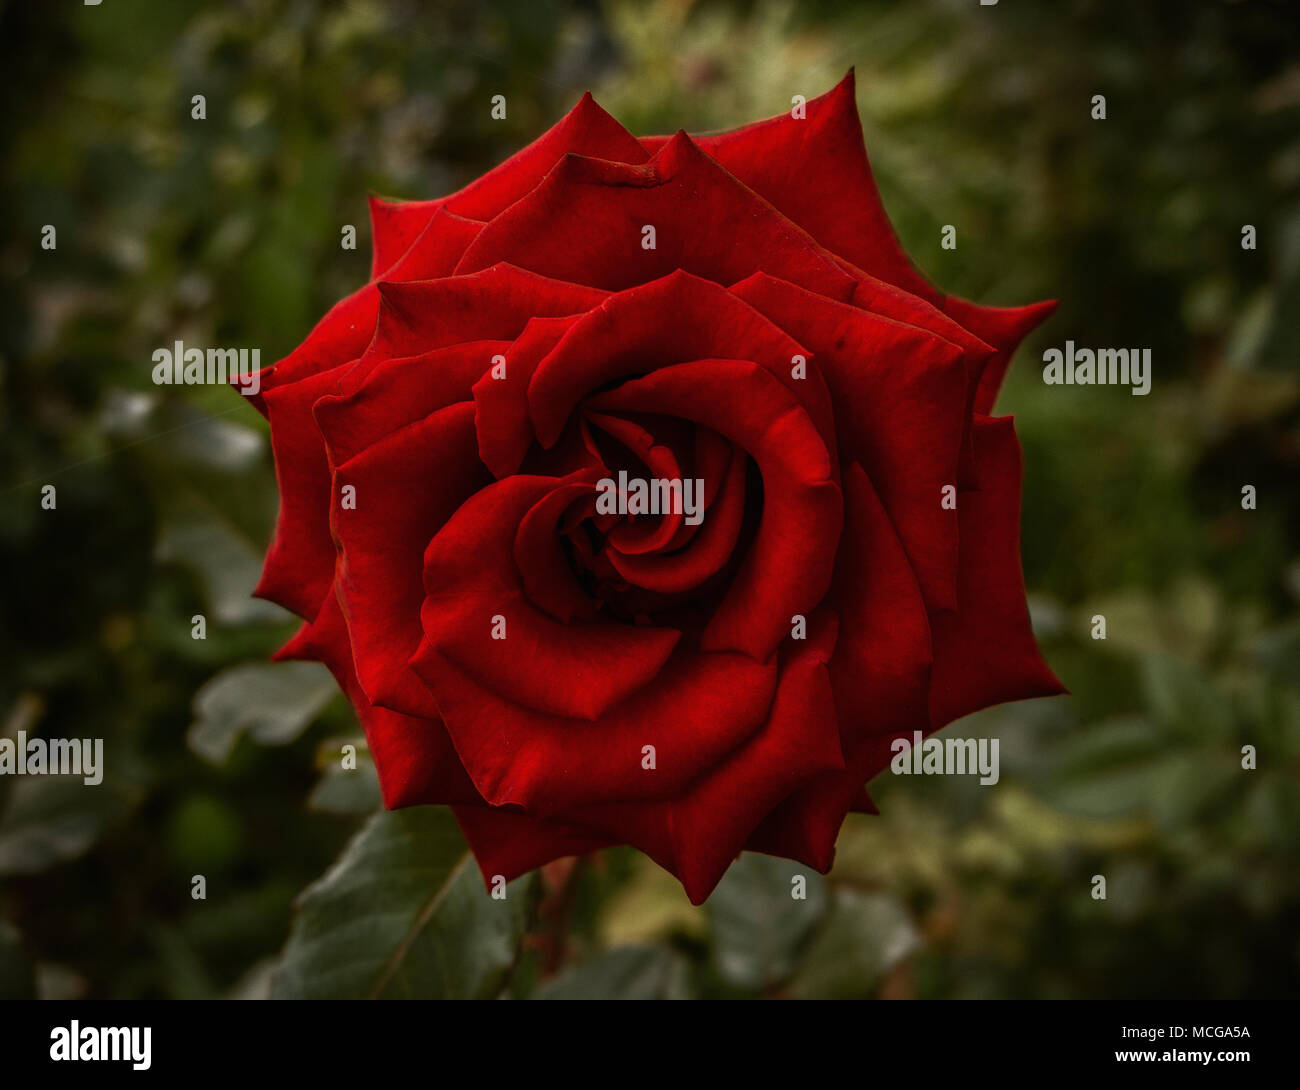 Red rose. Rose flower. Rose background. Red flower. Red rose style. Floral background. Stock Photo